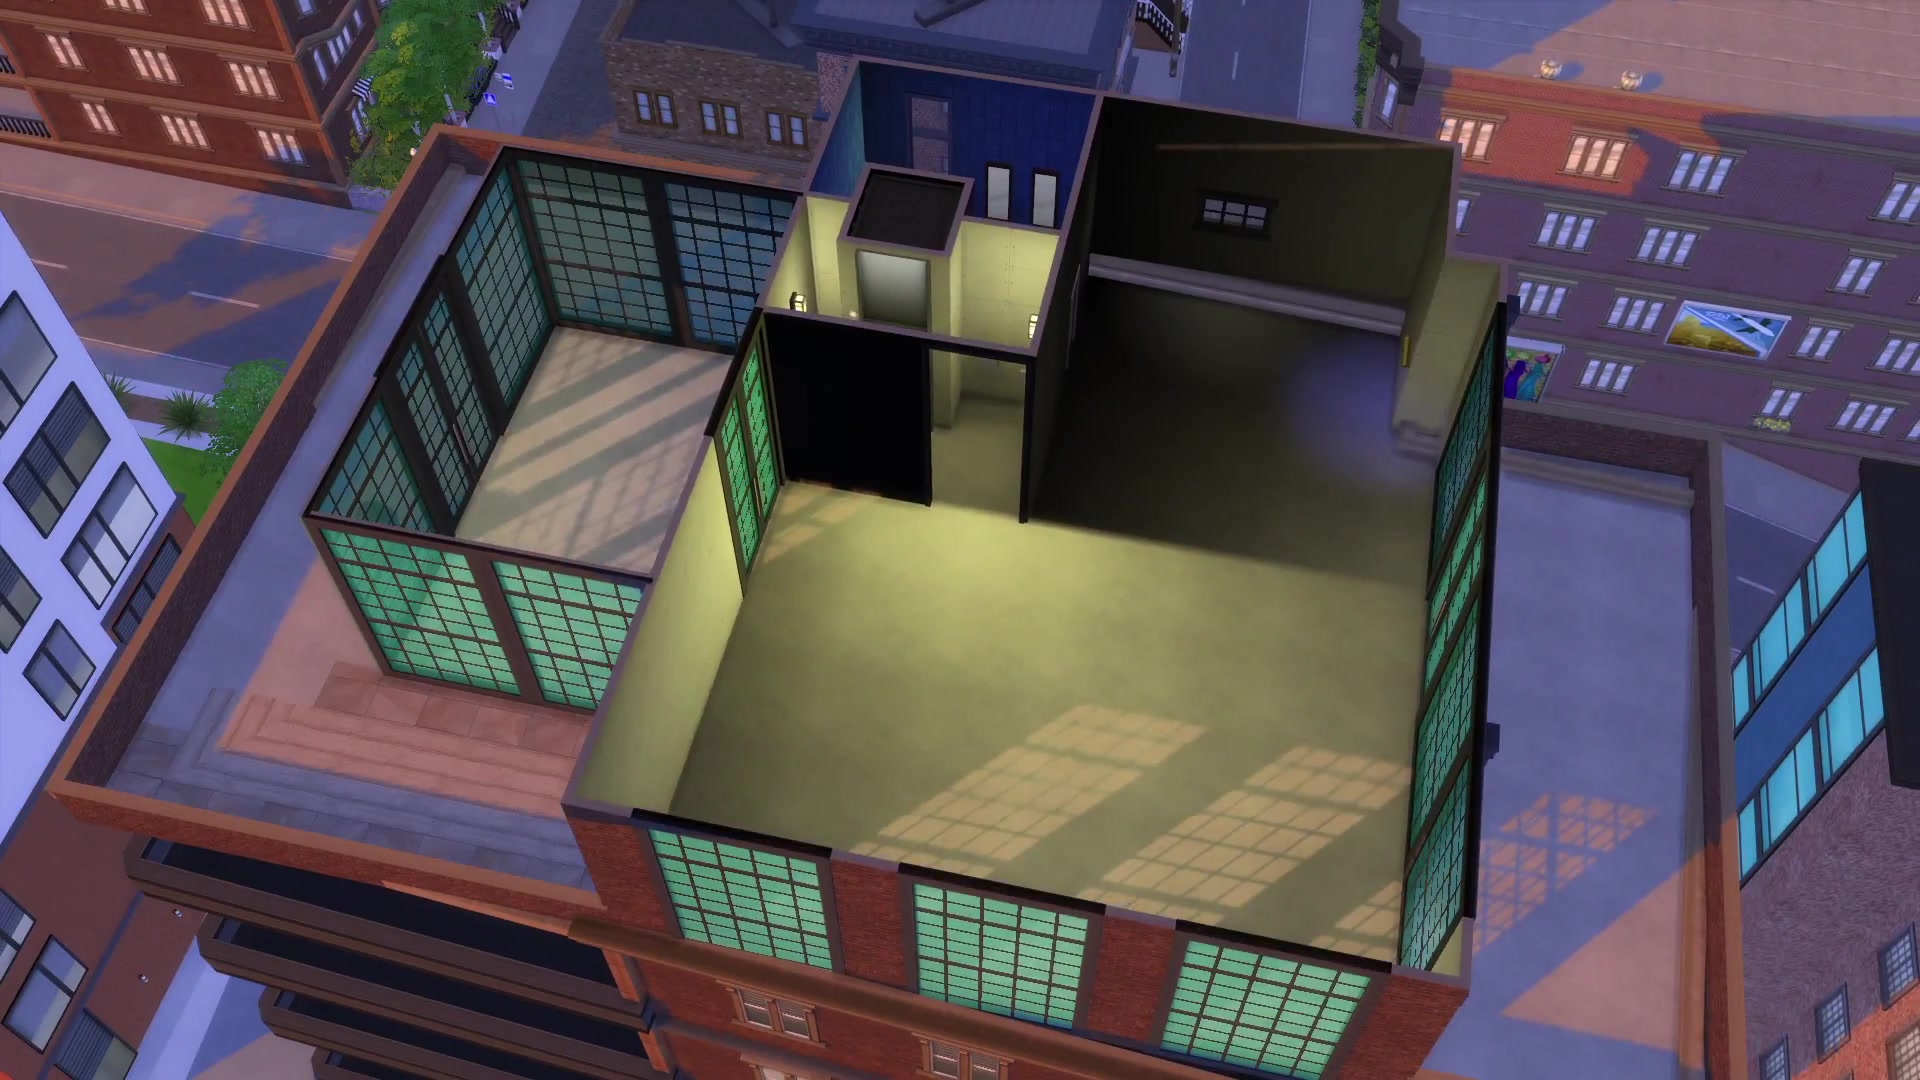 sims 4 city living free download utorrent